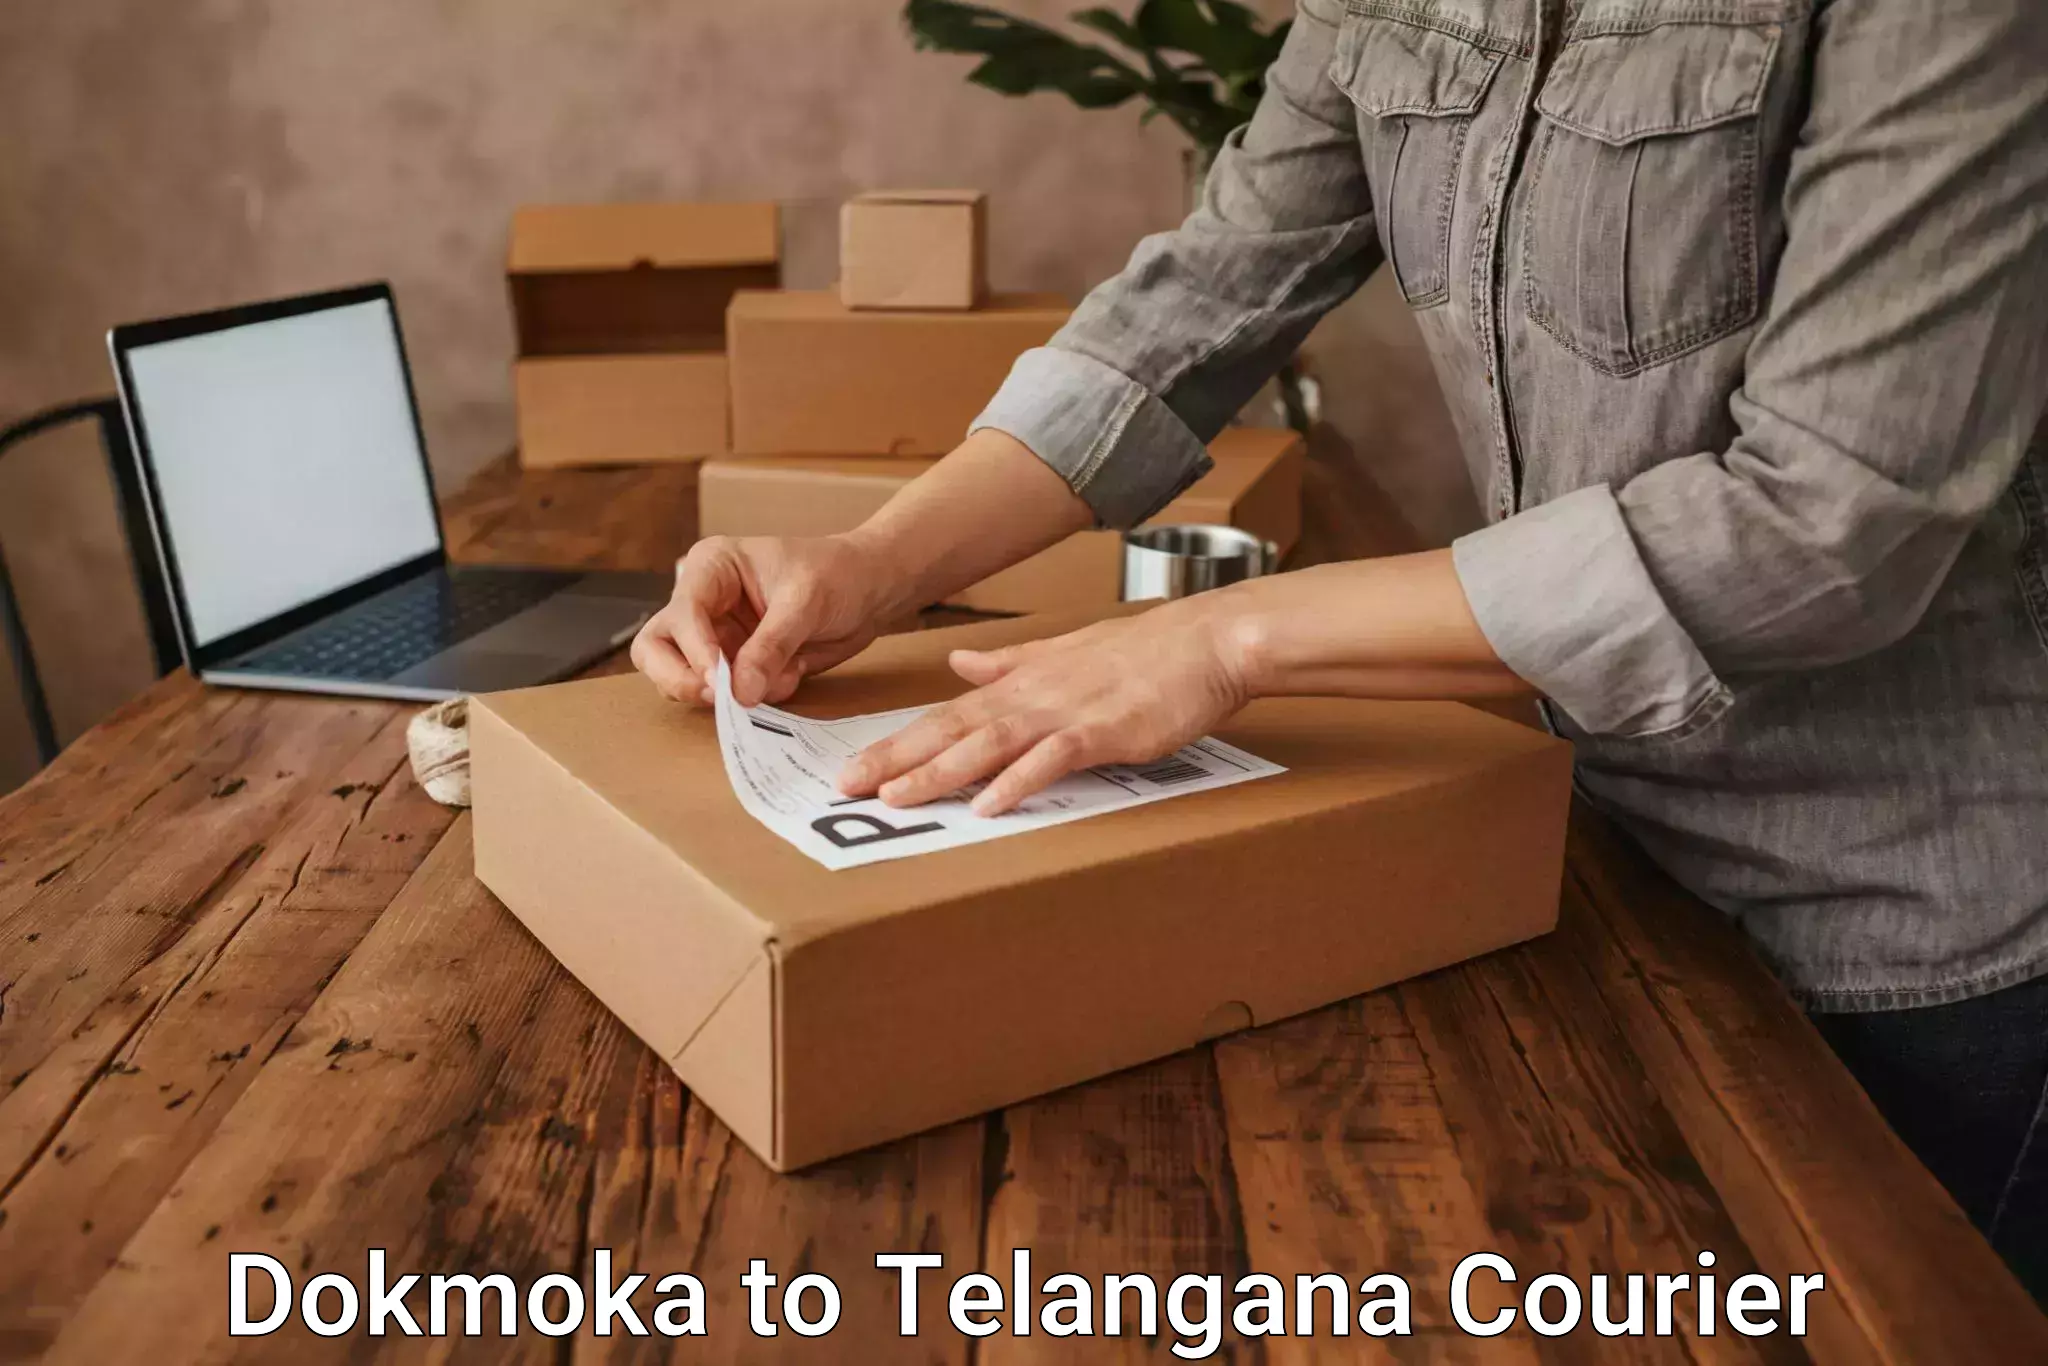 Sustainable delivery practices in Dokmoka to Telangana